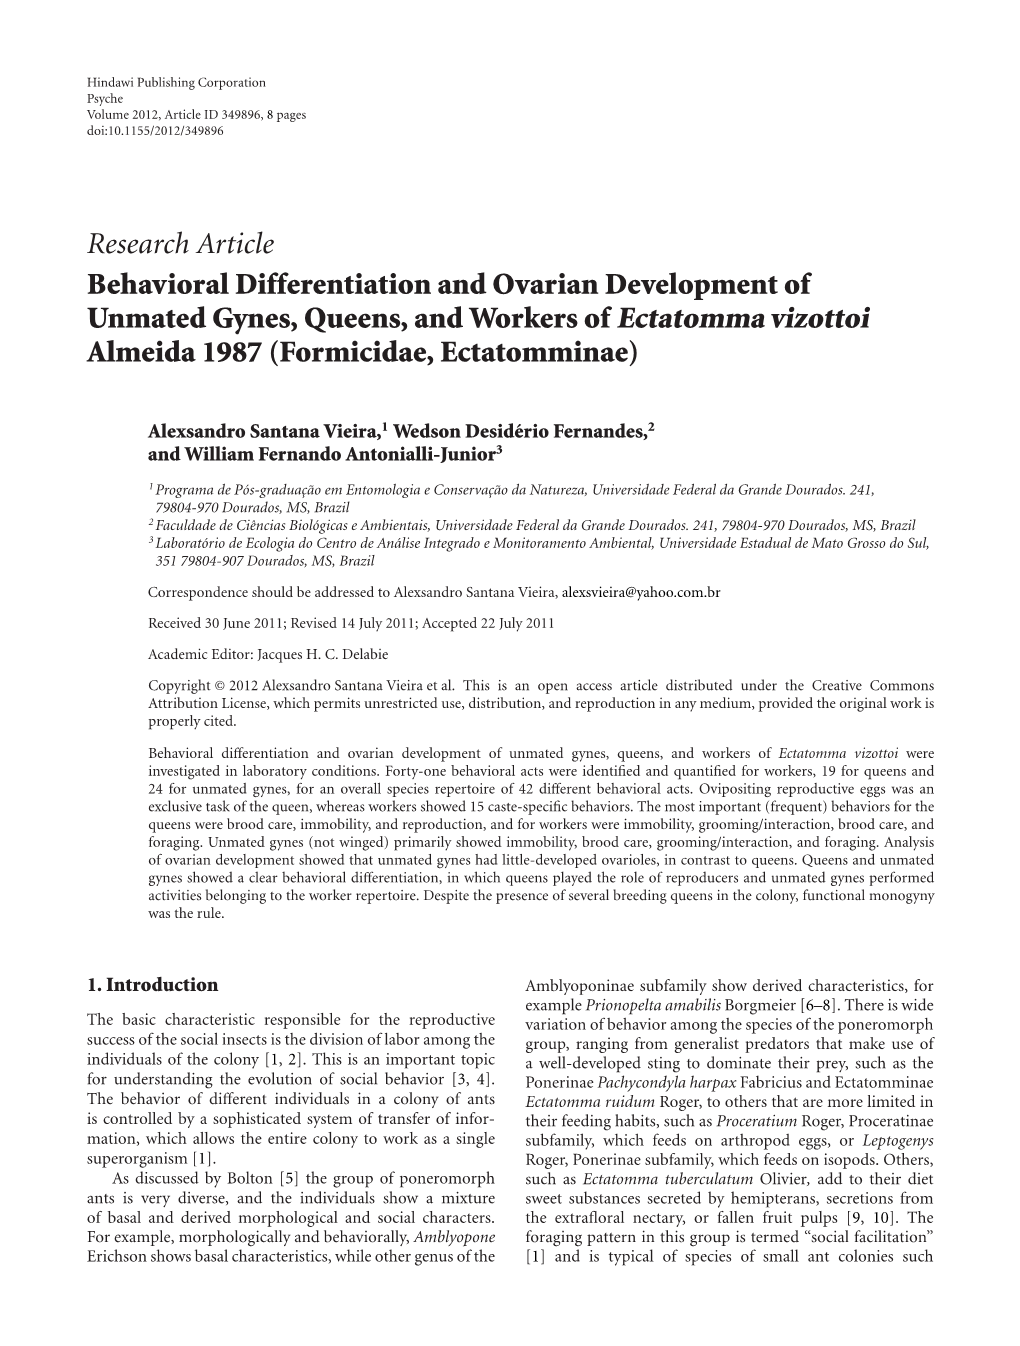 Behavioral Differentiation and Ovarian Development of Unmated Gynes, Queens, and Workers of Ectatomma Vizottoi Almeida 1987 (Formicidae, Ectatomminae)